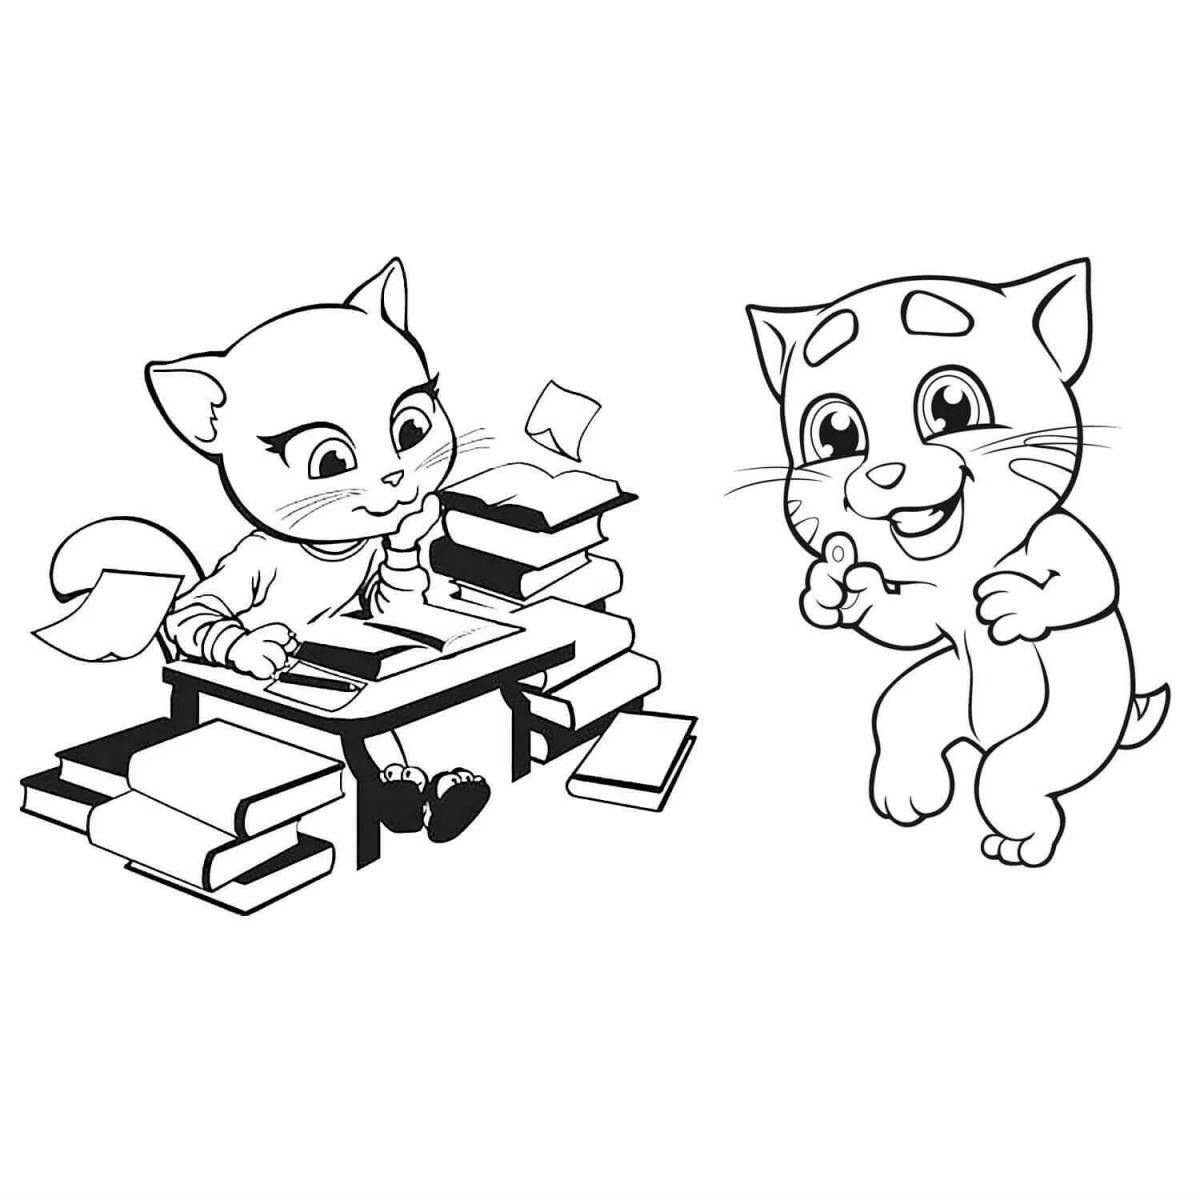 Coloring page my talking angela